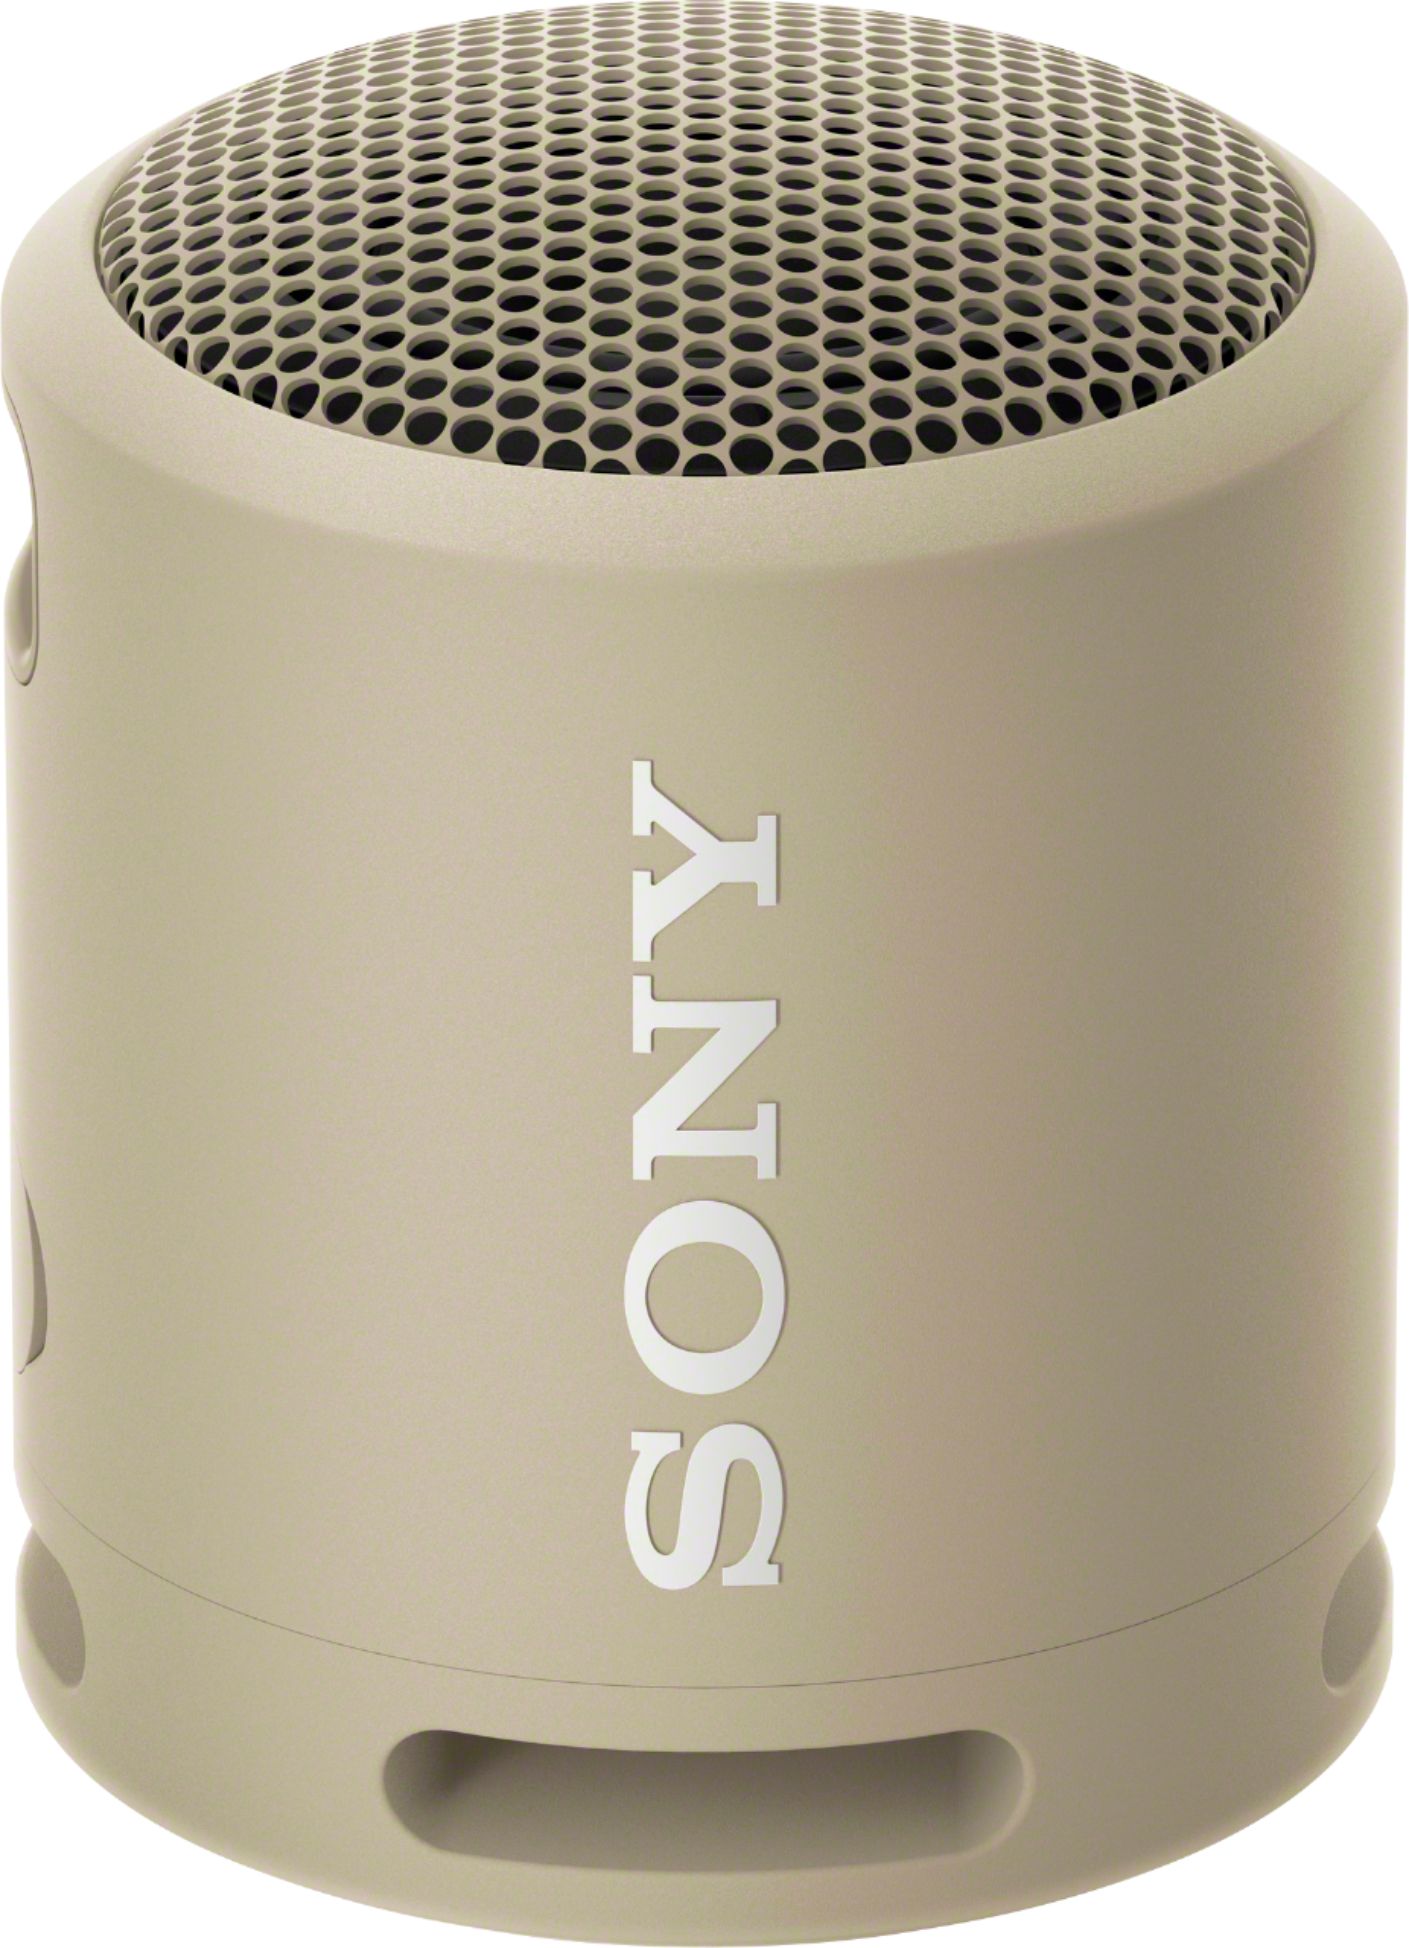 Compact BASS Speaker Taupe Best EXTRA Portable Buy: SRSXB13/C Sony Bluetooth